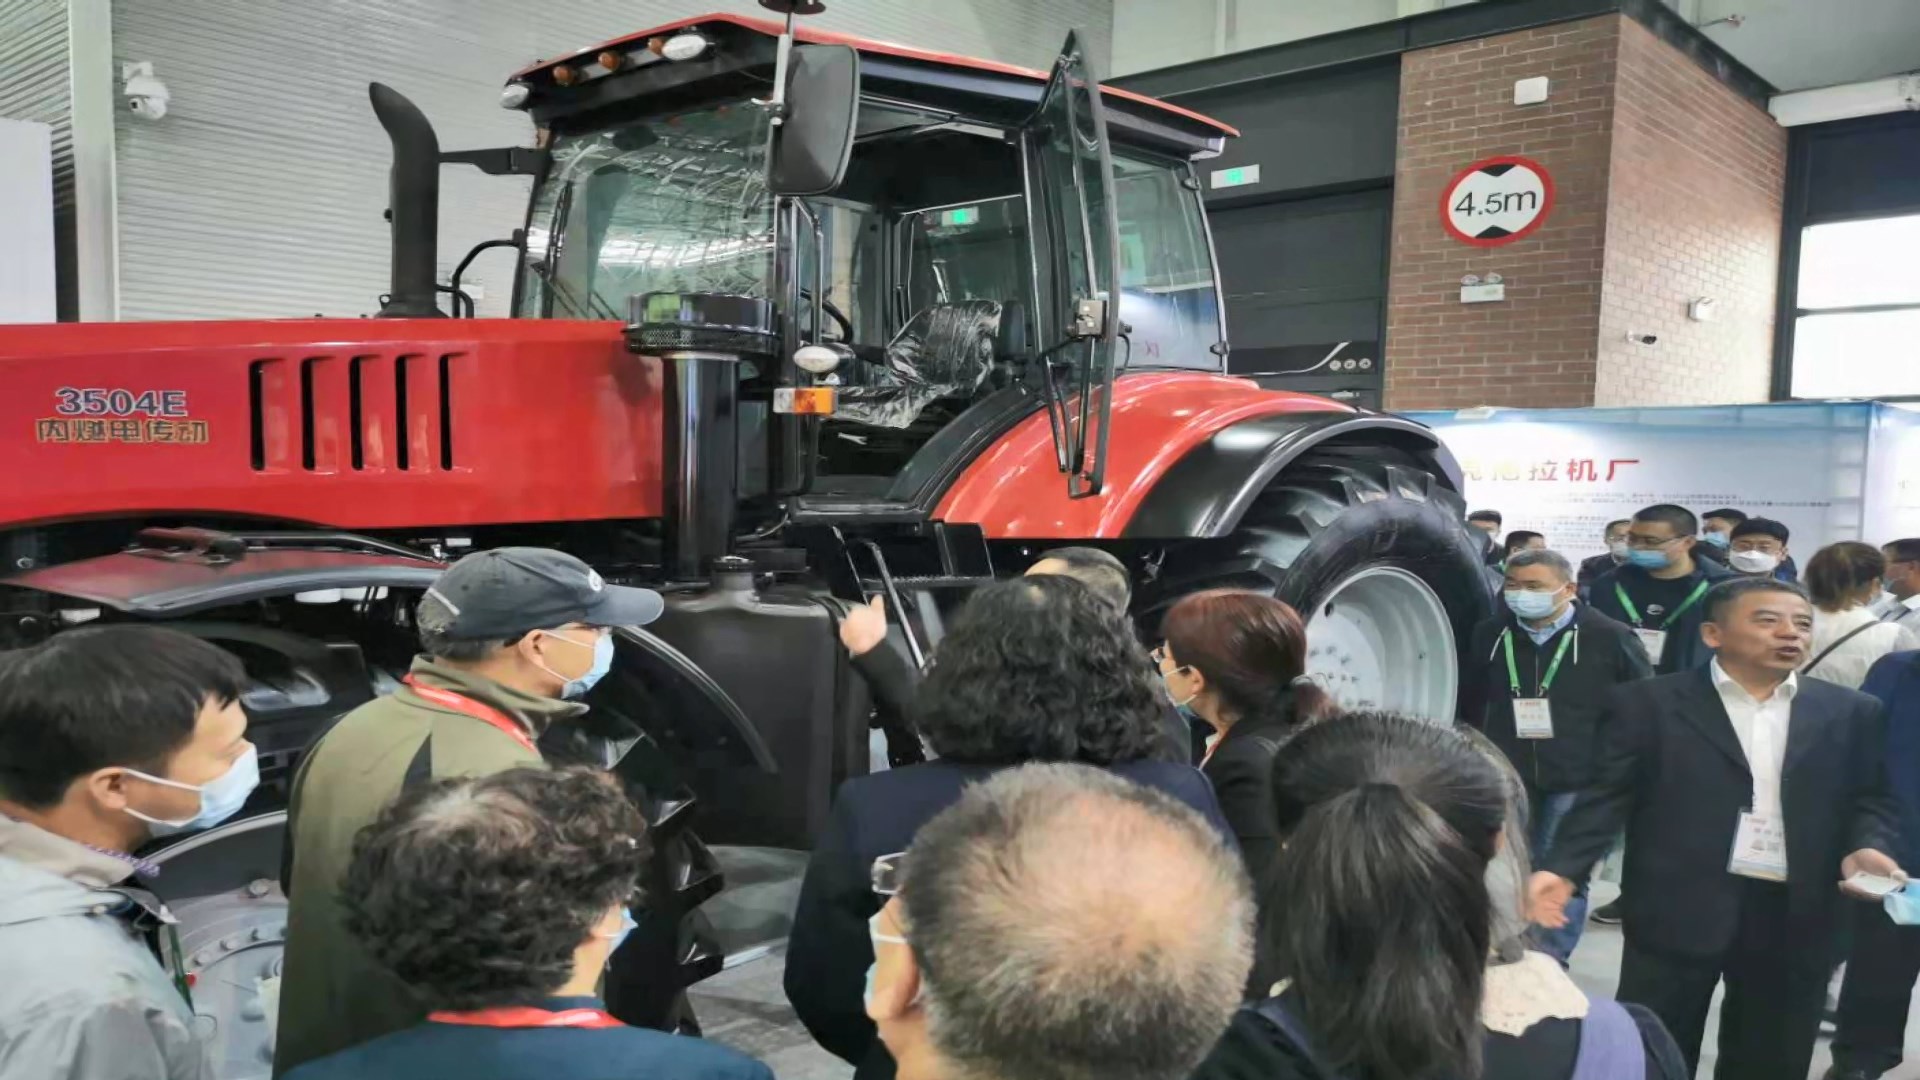 New model of BELARUS tractor presented in China